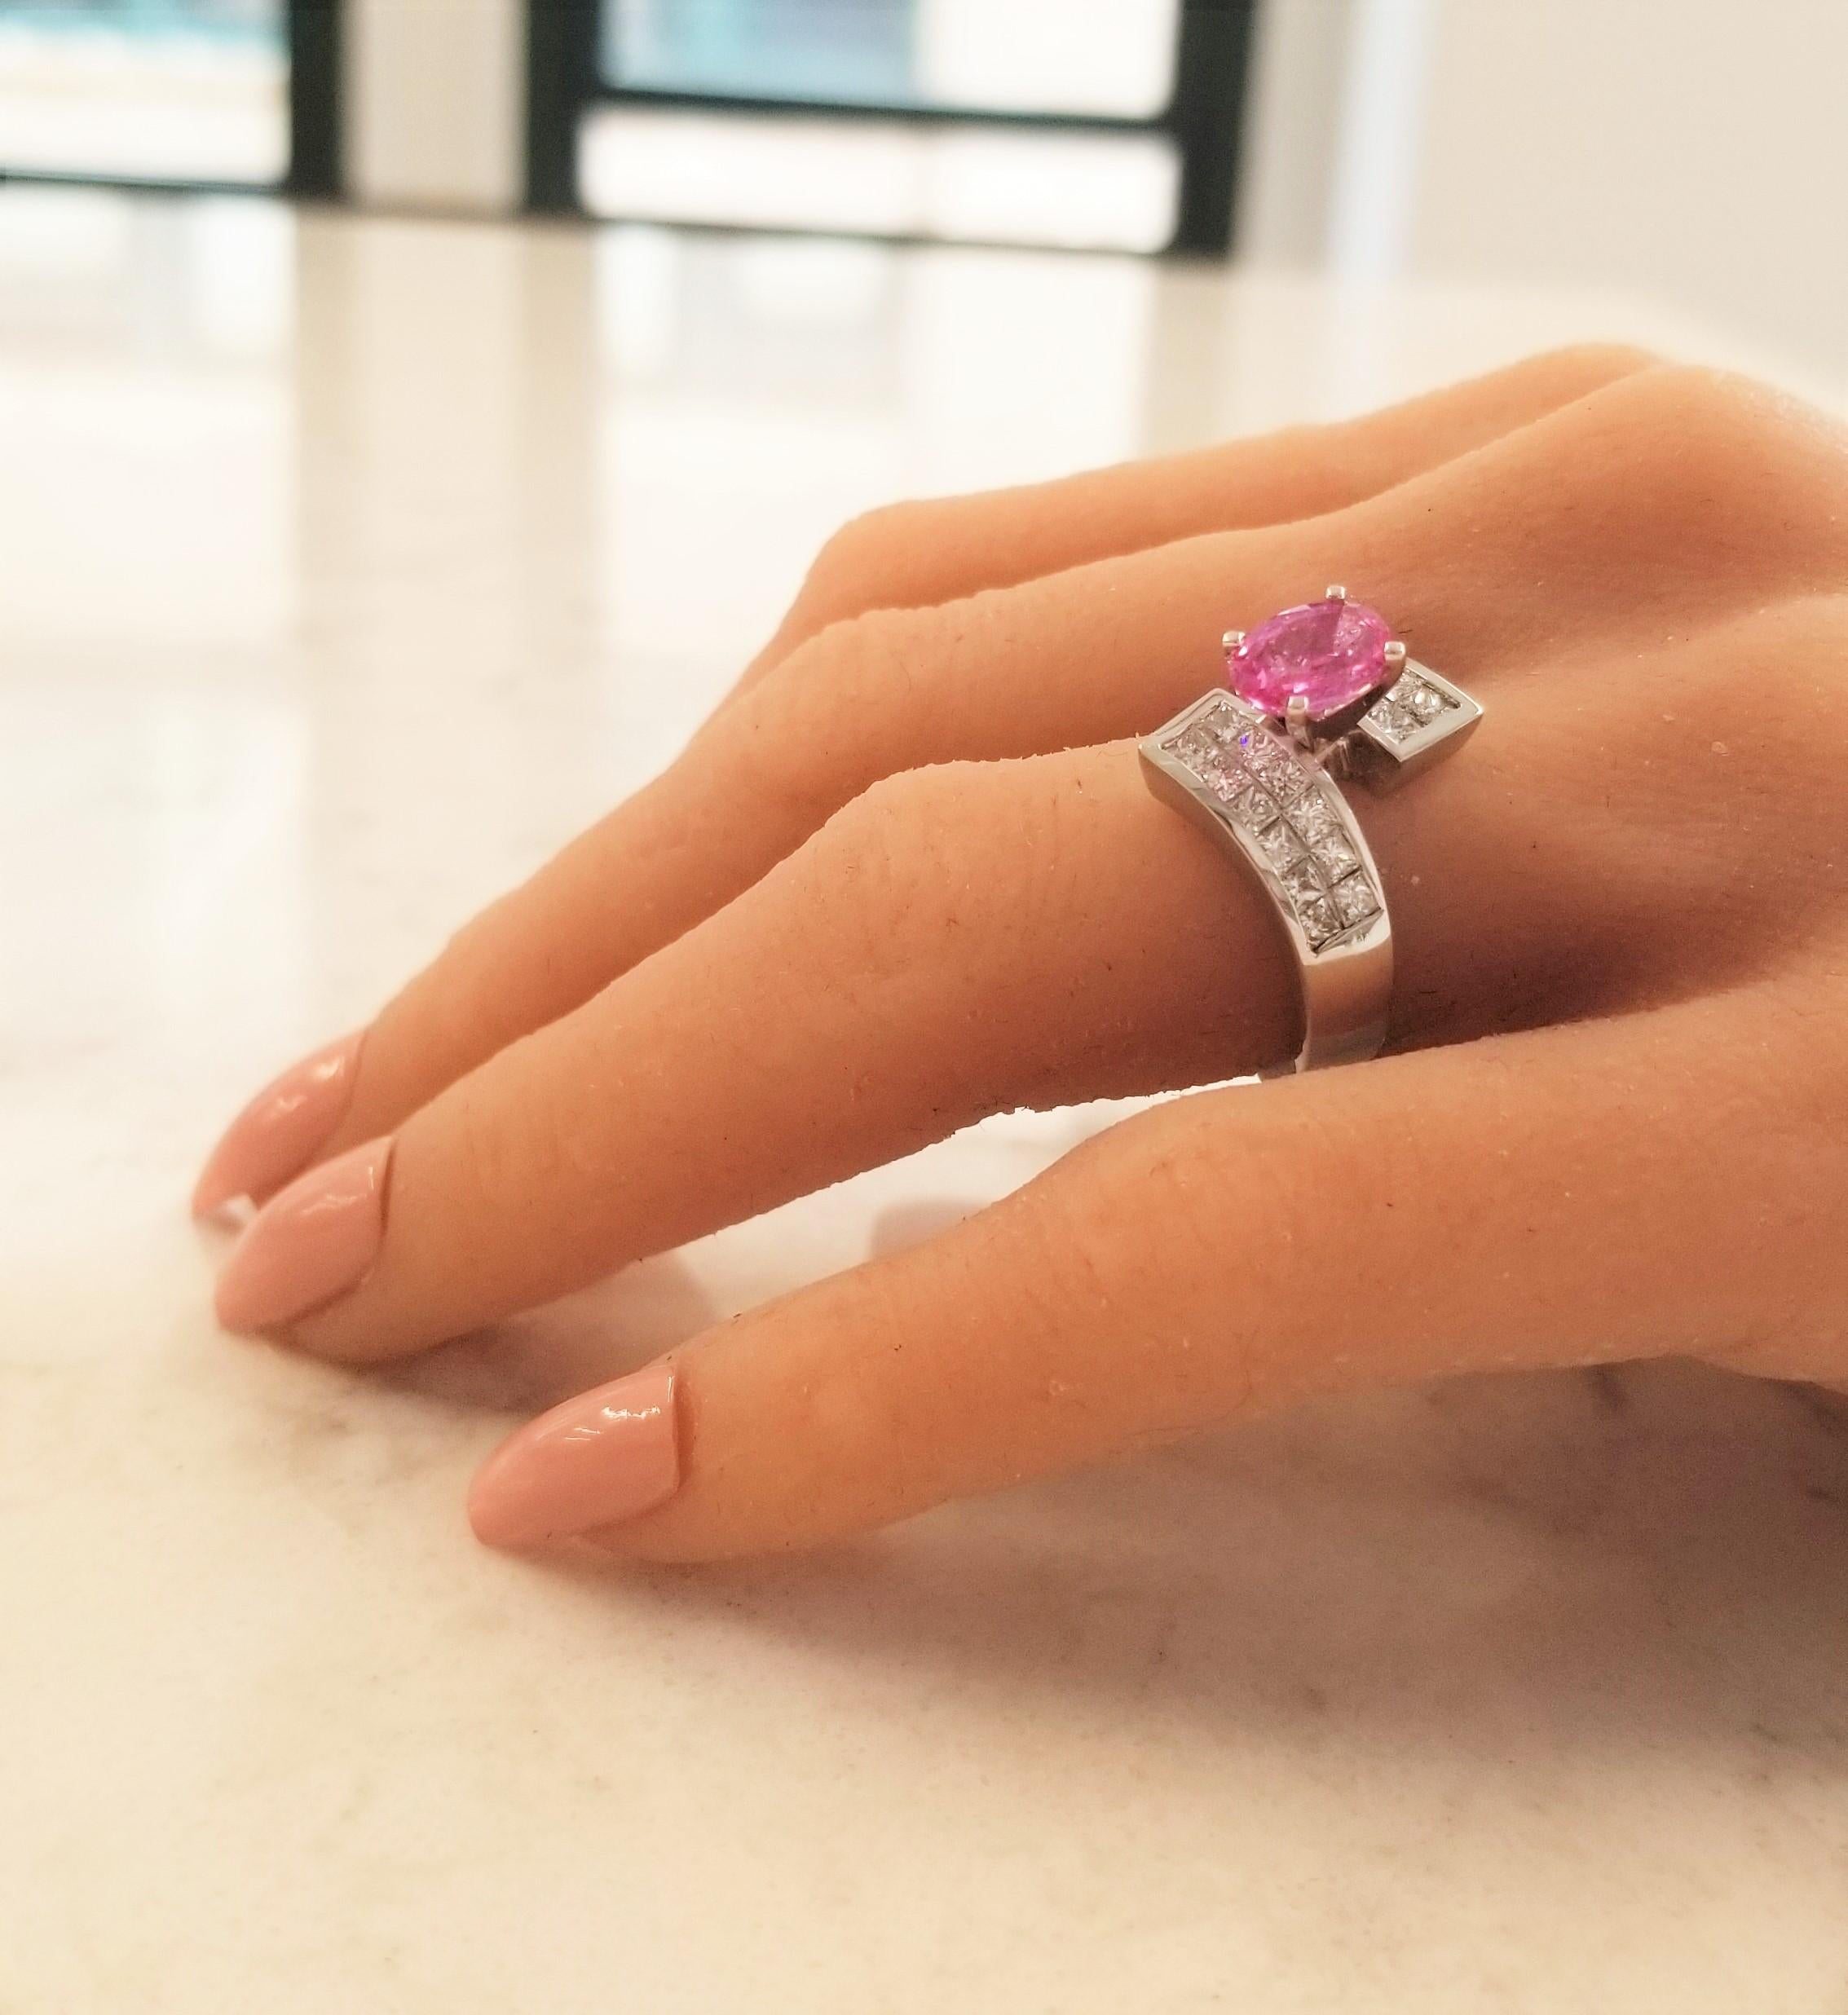 This modern bypass ring is crafted to set you apart from the crowd in every way! It is packed with elegance, grace, and timeless complexity. This lavish platinum, intense pink sapphire, and diamond ring serves up the perfect coverage for your hand.